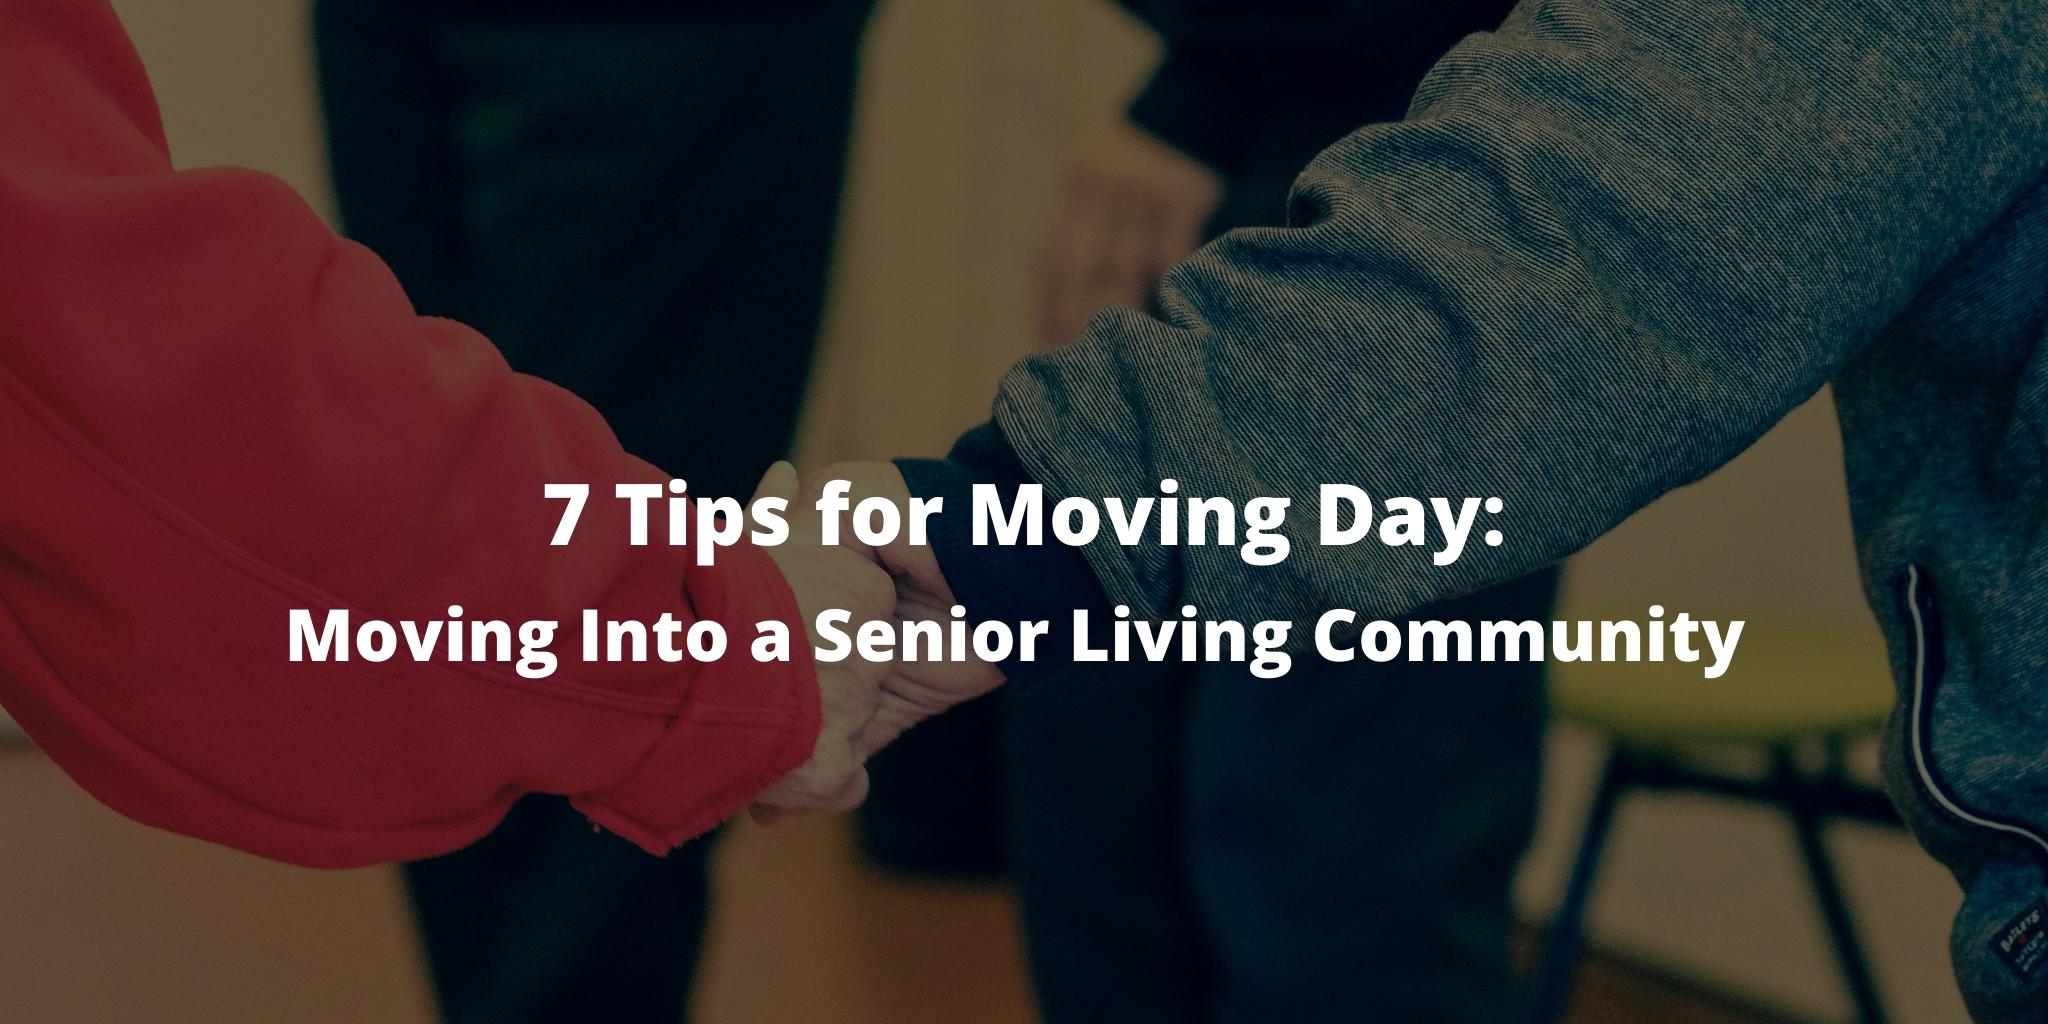 7 Tips for Moving Day: Moving Into a Senior Living Community